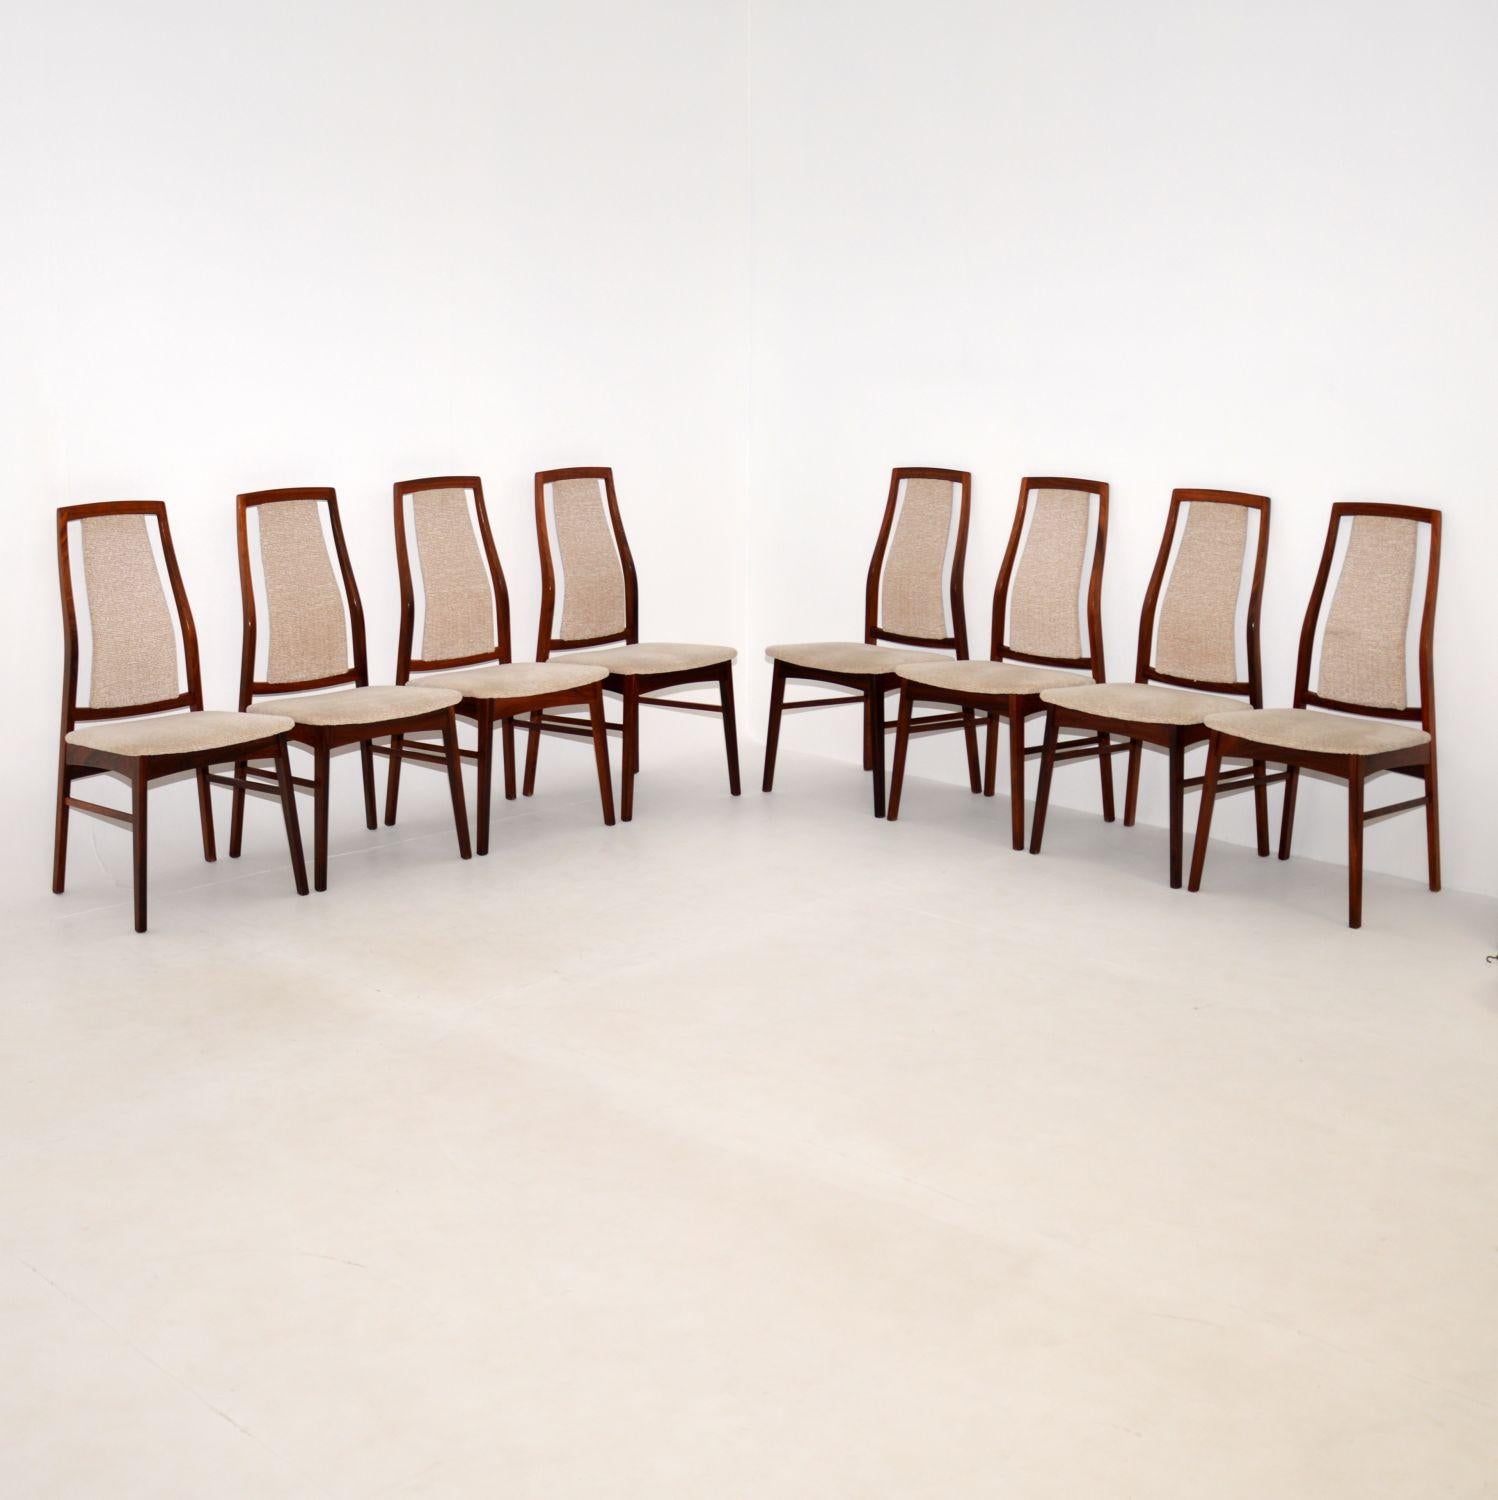 A superb set of eight Danish dining chairs in solid wood. These were made in Denmark, they date from the 1960’s.

They are beautifully designed, with sculptural backs and elegant lines. The quality is amazing, they are solid wood throughout, with